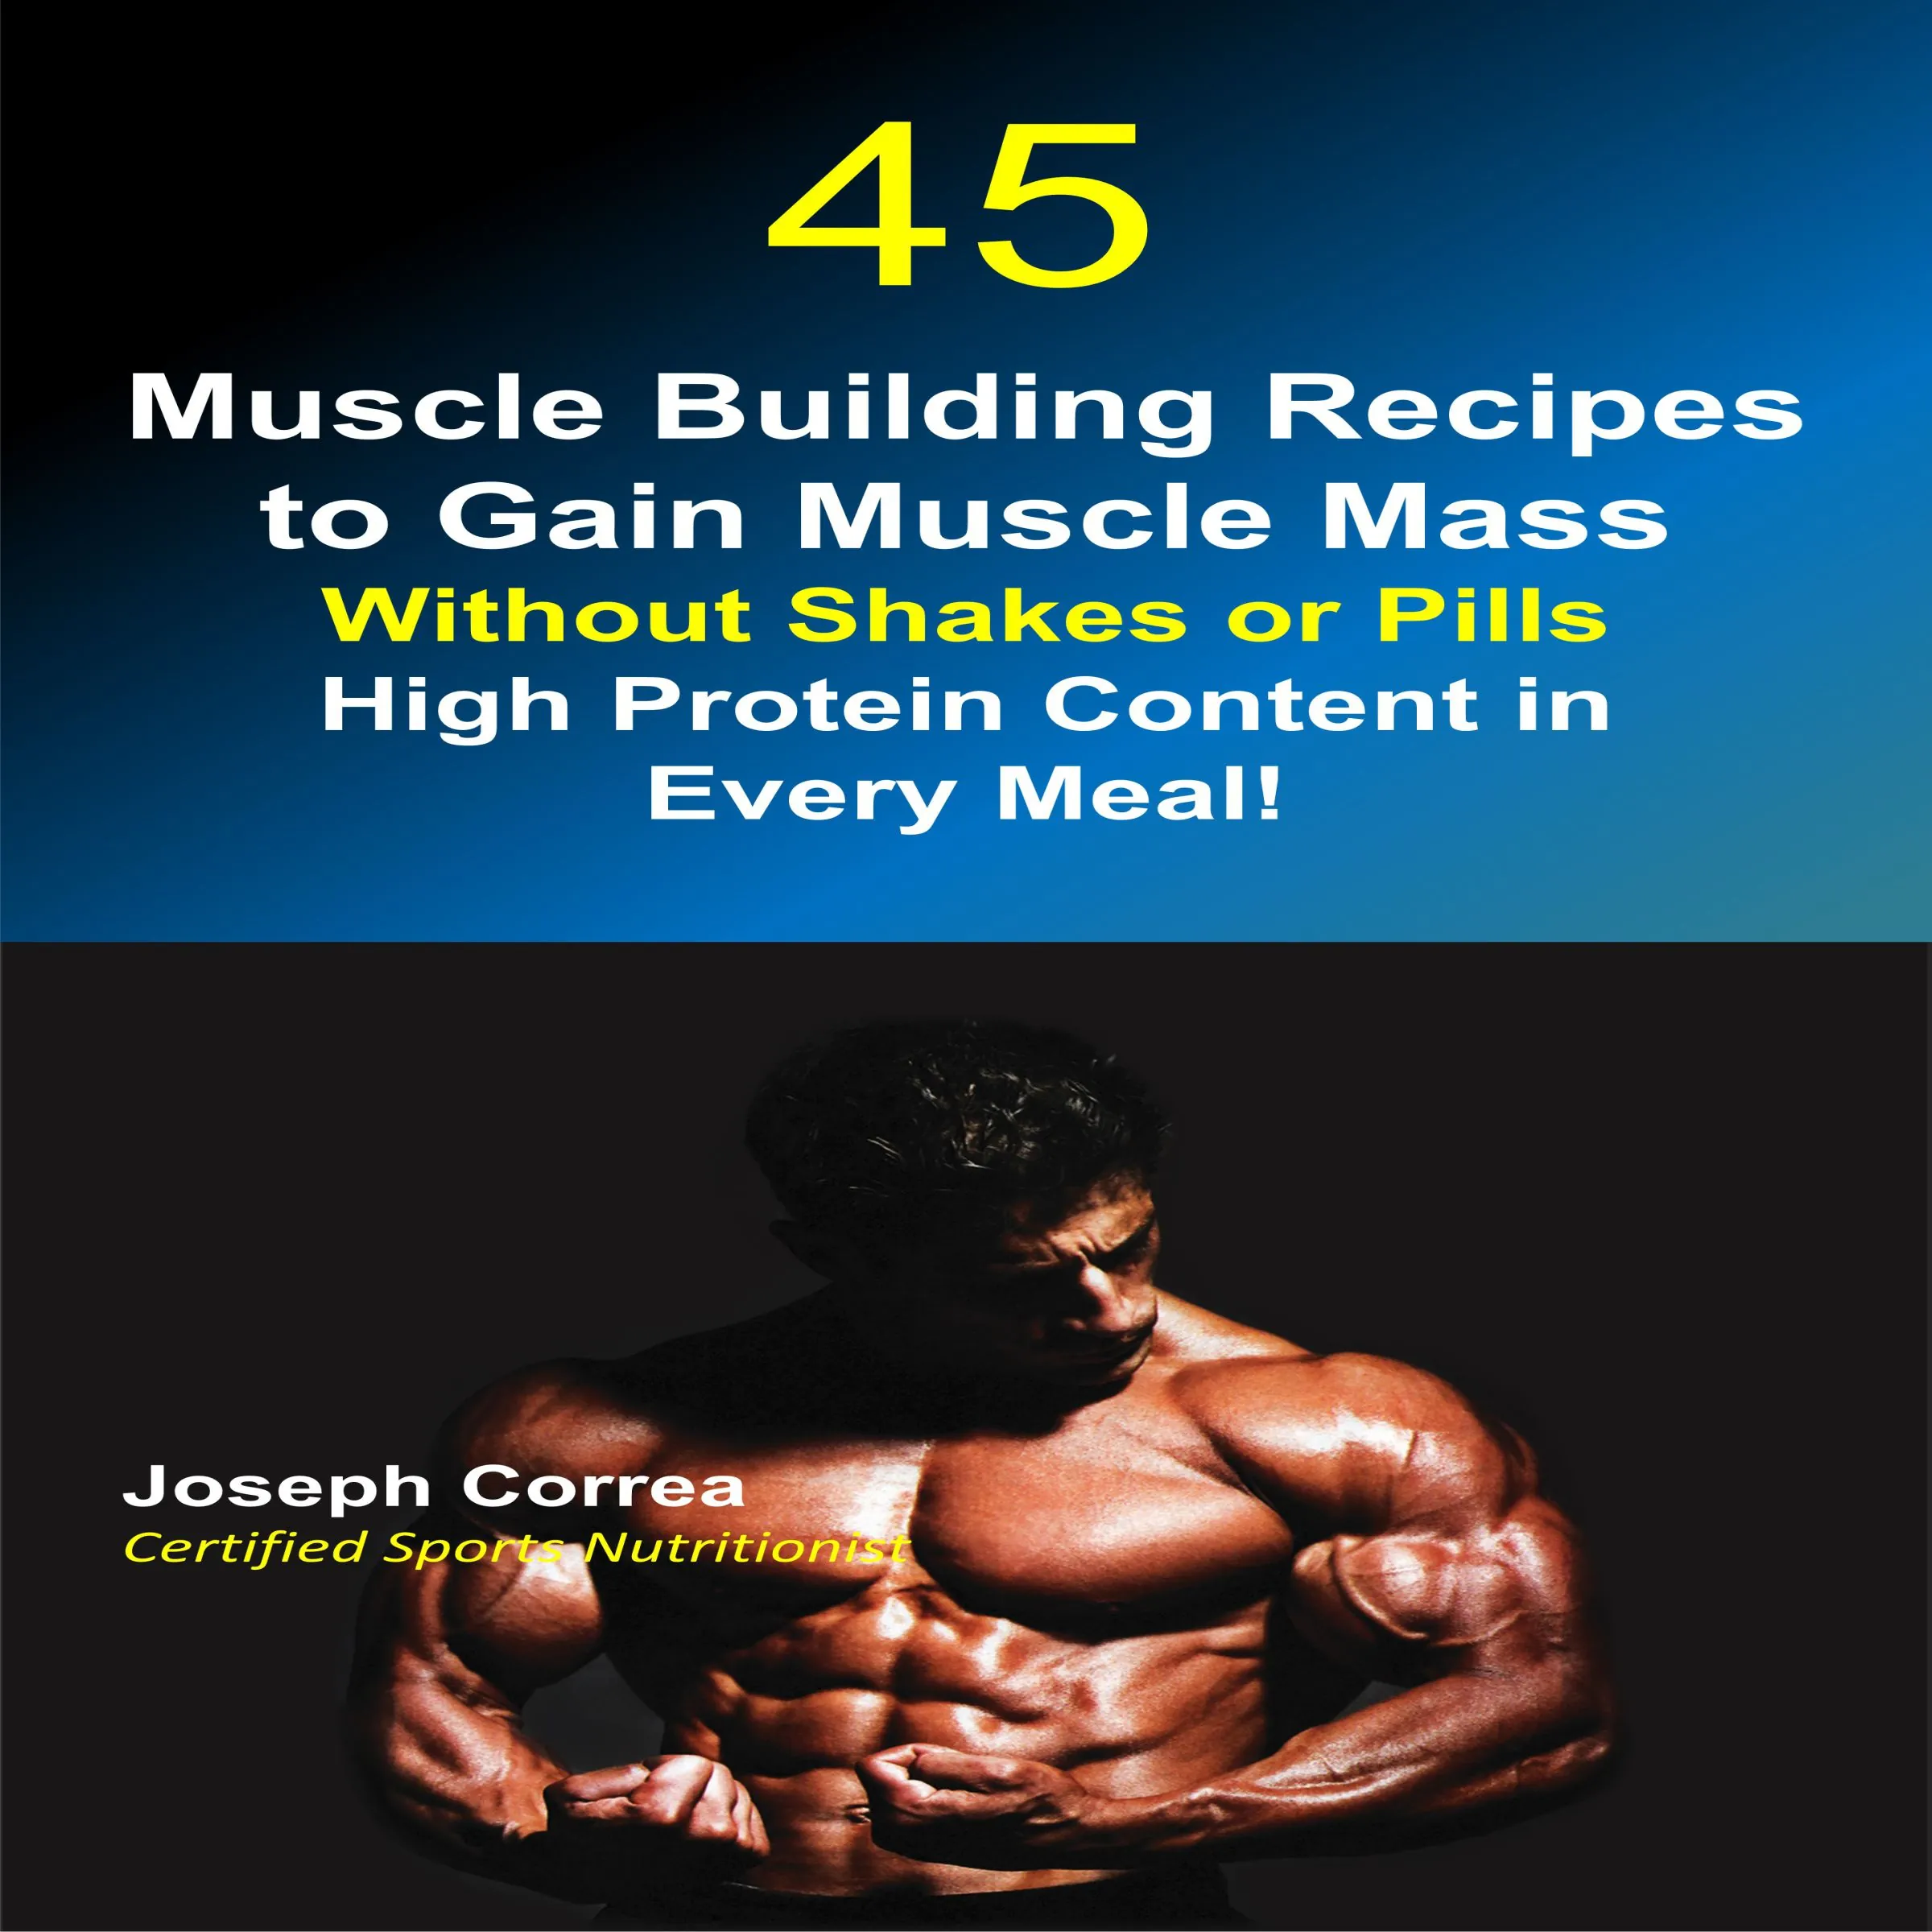 45 Muscle Building Recipes to Gain Muscle Mass Without Shakes or Pills: High Protein Content in Every Meal! Audiobook by Joseph Correa